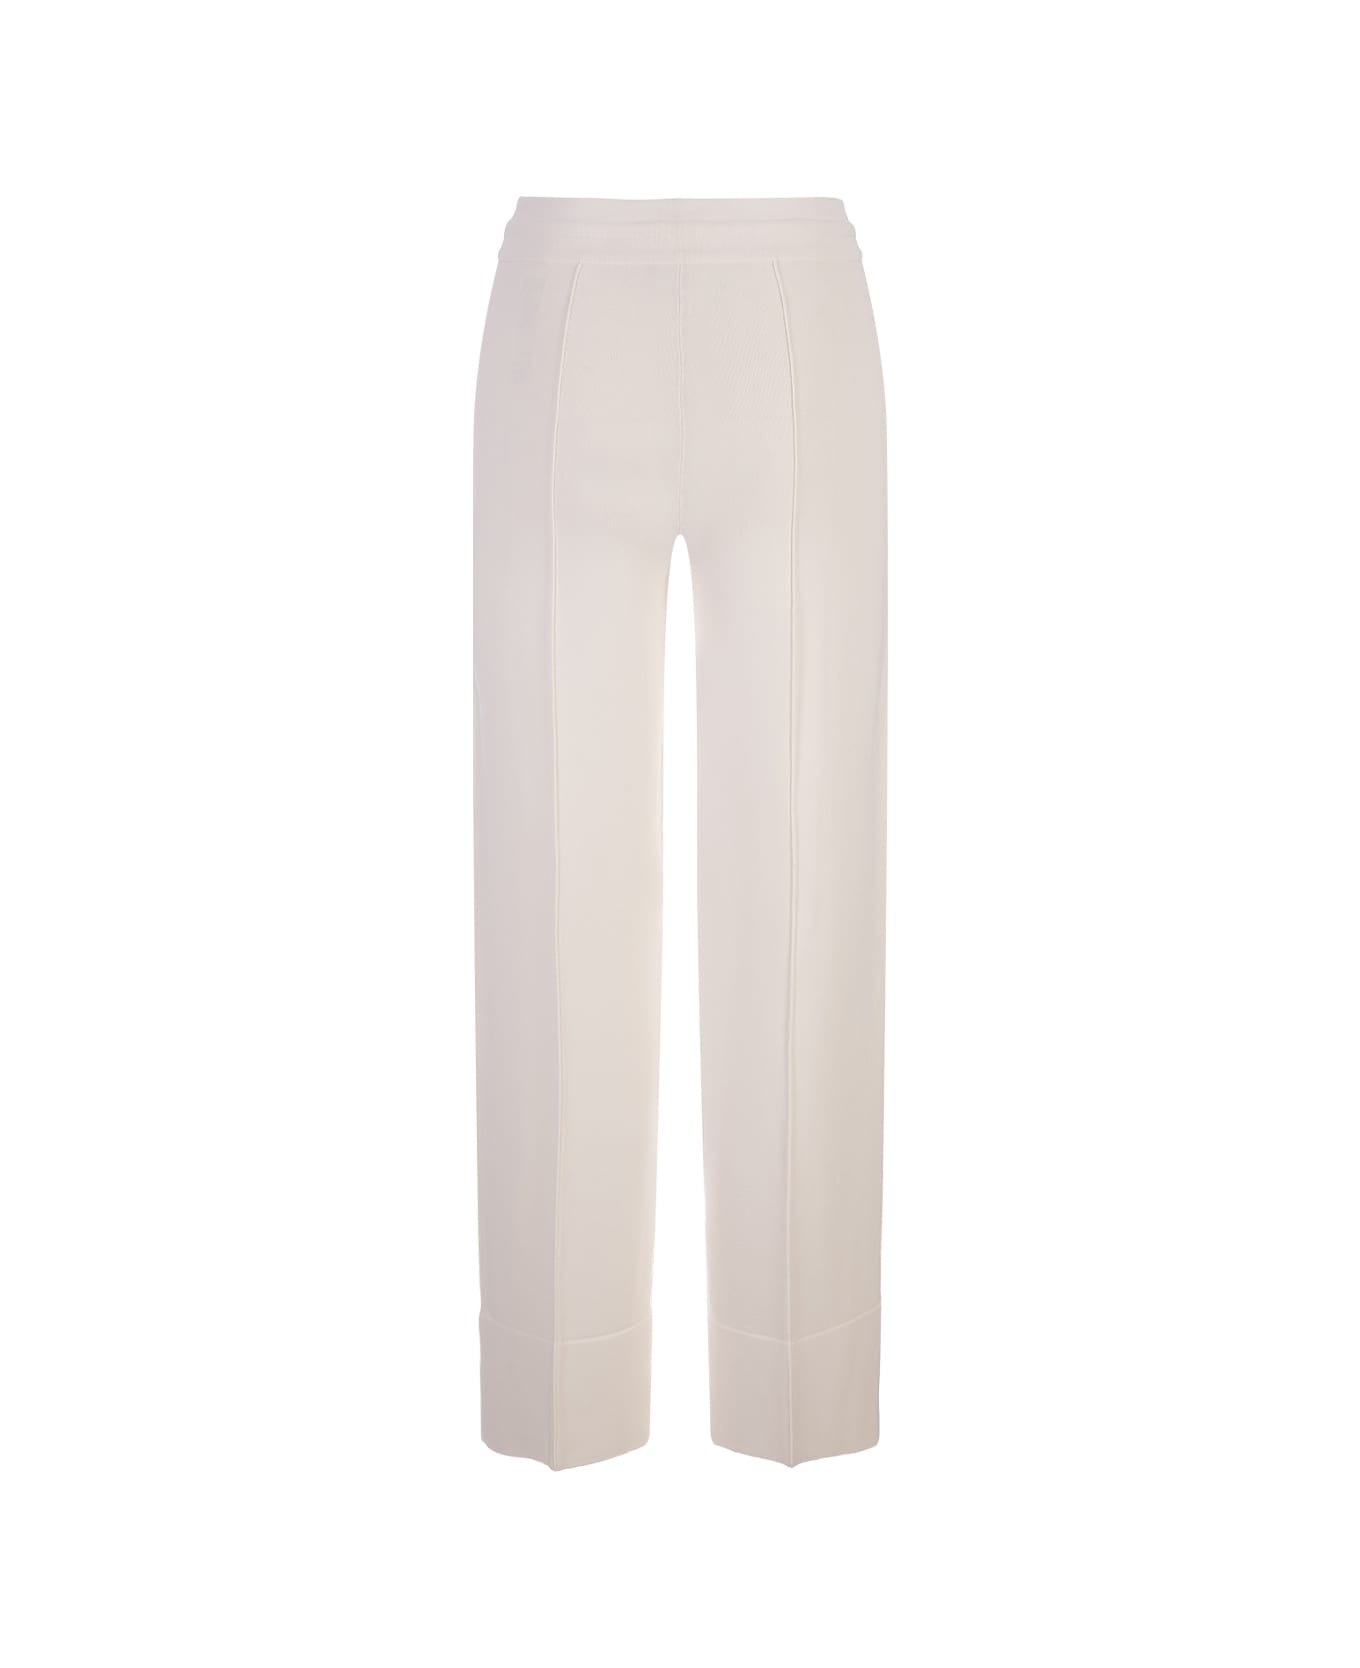 Ermanno Scervino White Trousers With Drawstring - White ボトムス